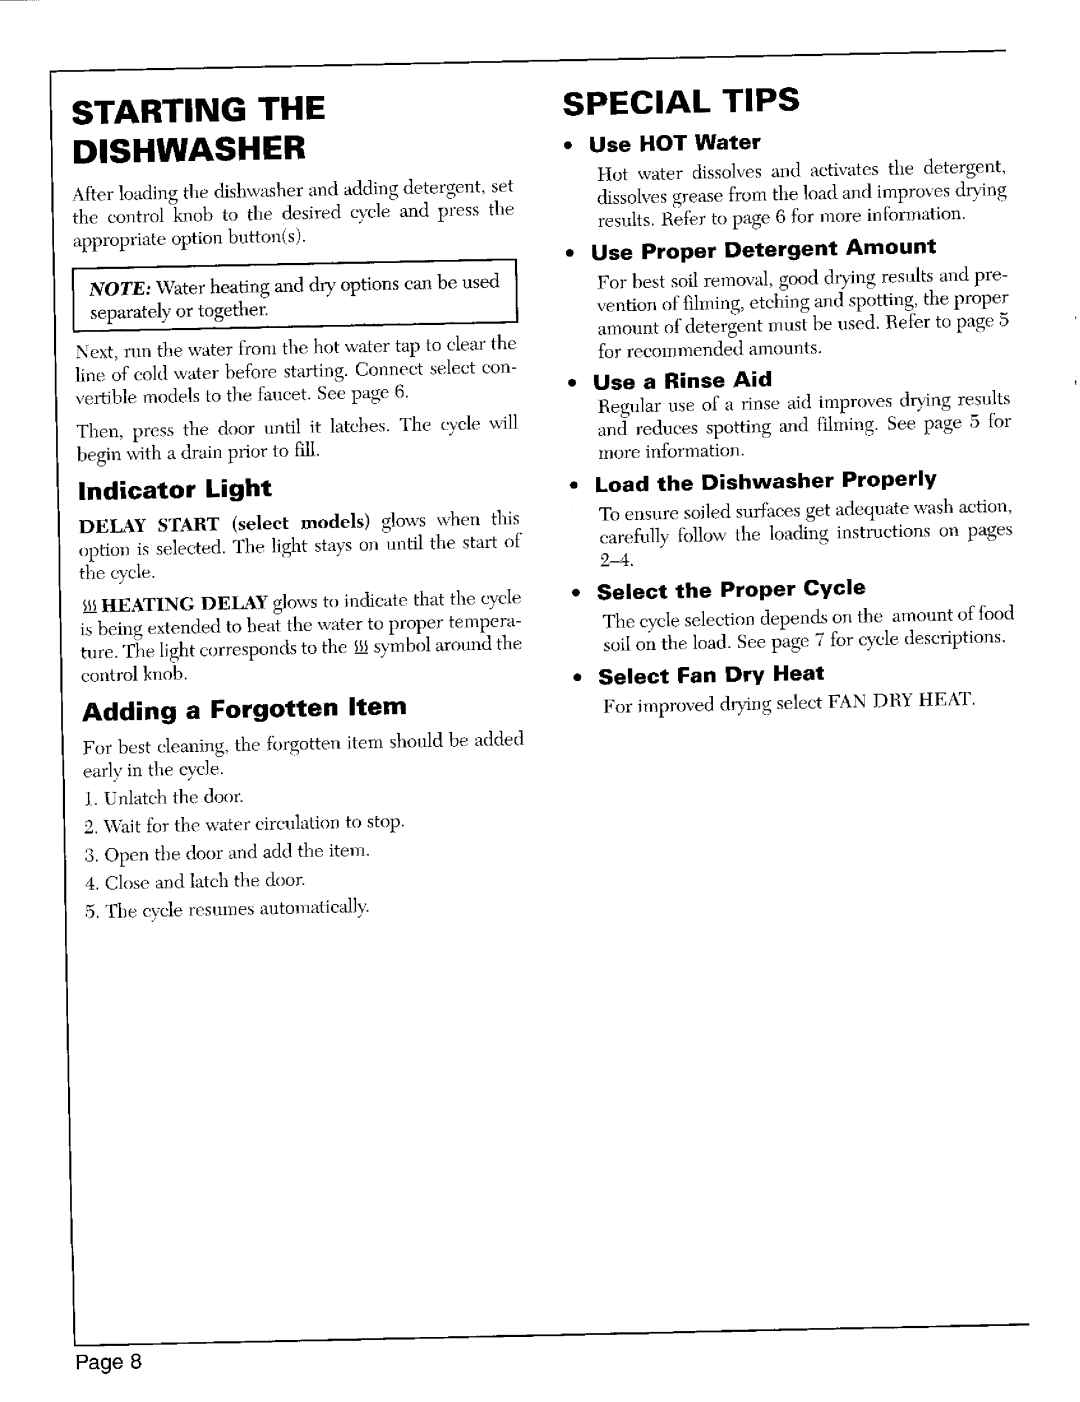 Maytag 7602 Starting The Dishwasher, Special Tips, Indicator Light, Adding a Forgotten Item, Use Proper Detergent Amount 